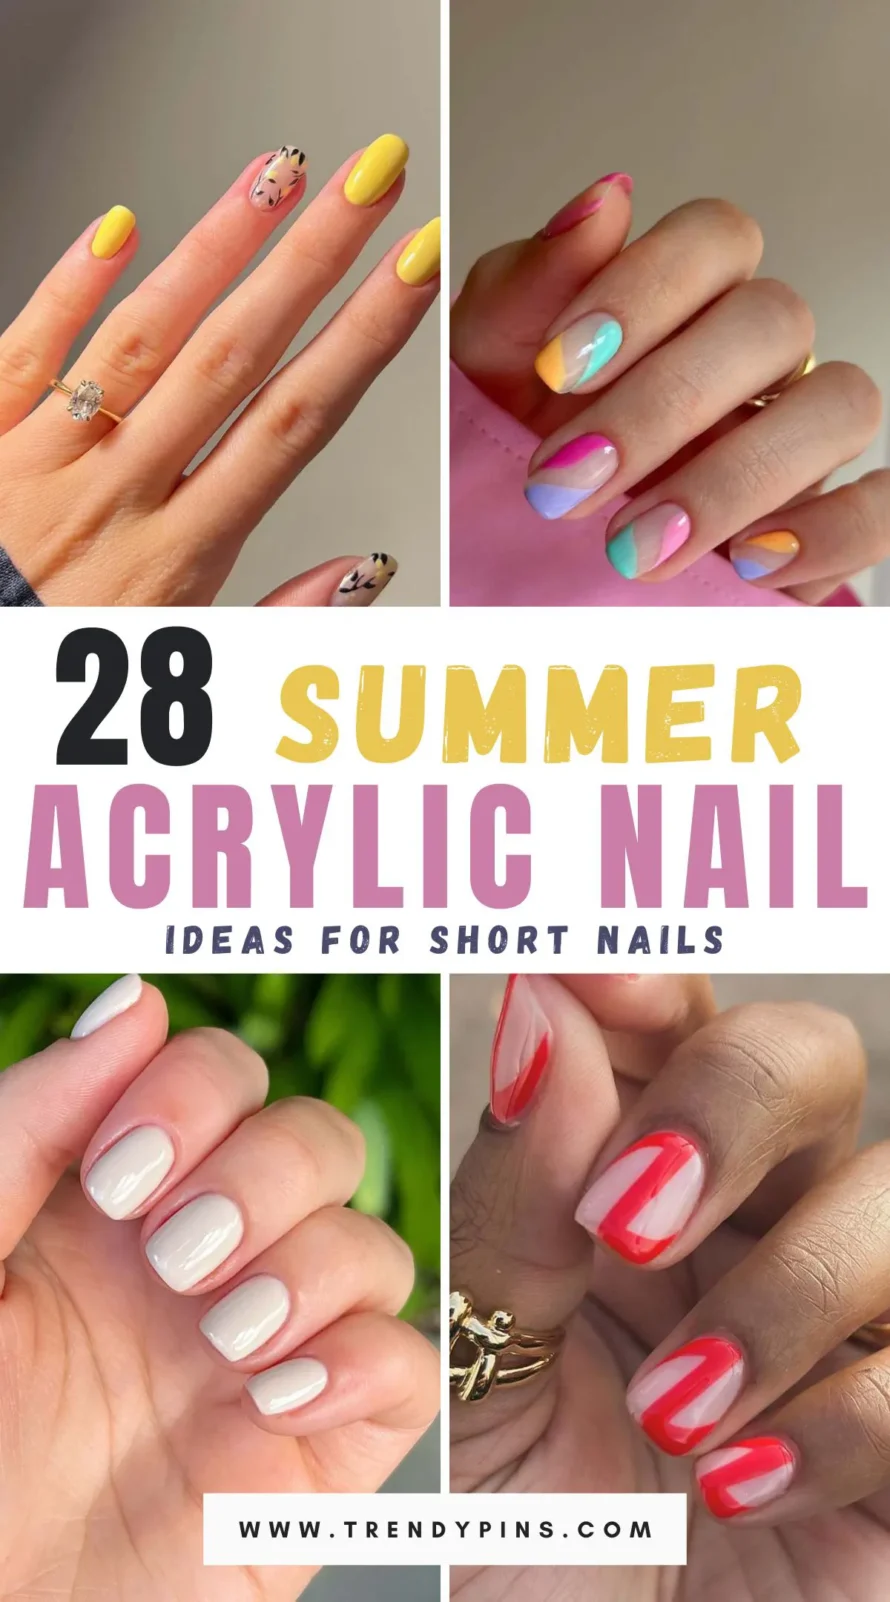 Check out 28 stunning summer acrylic nail ideas perfect for short nails. From vibrant colors to chic designs, find your next nail inspiration here!